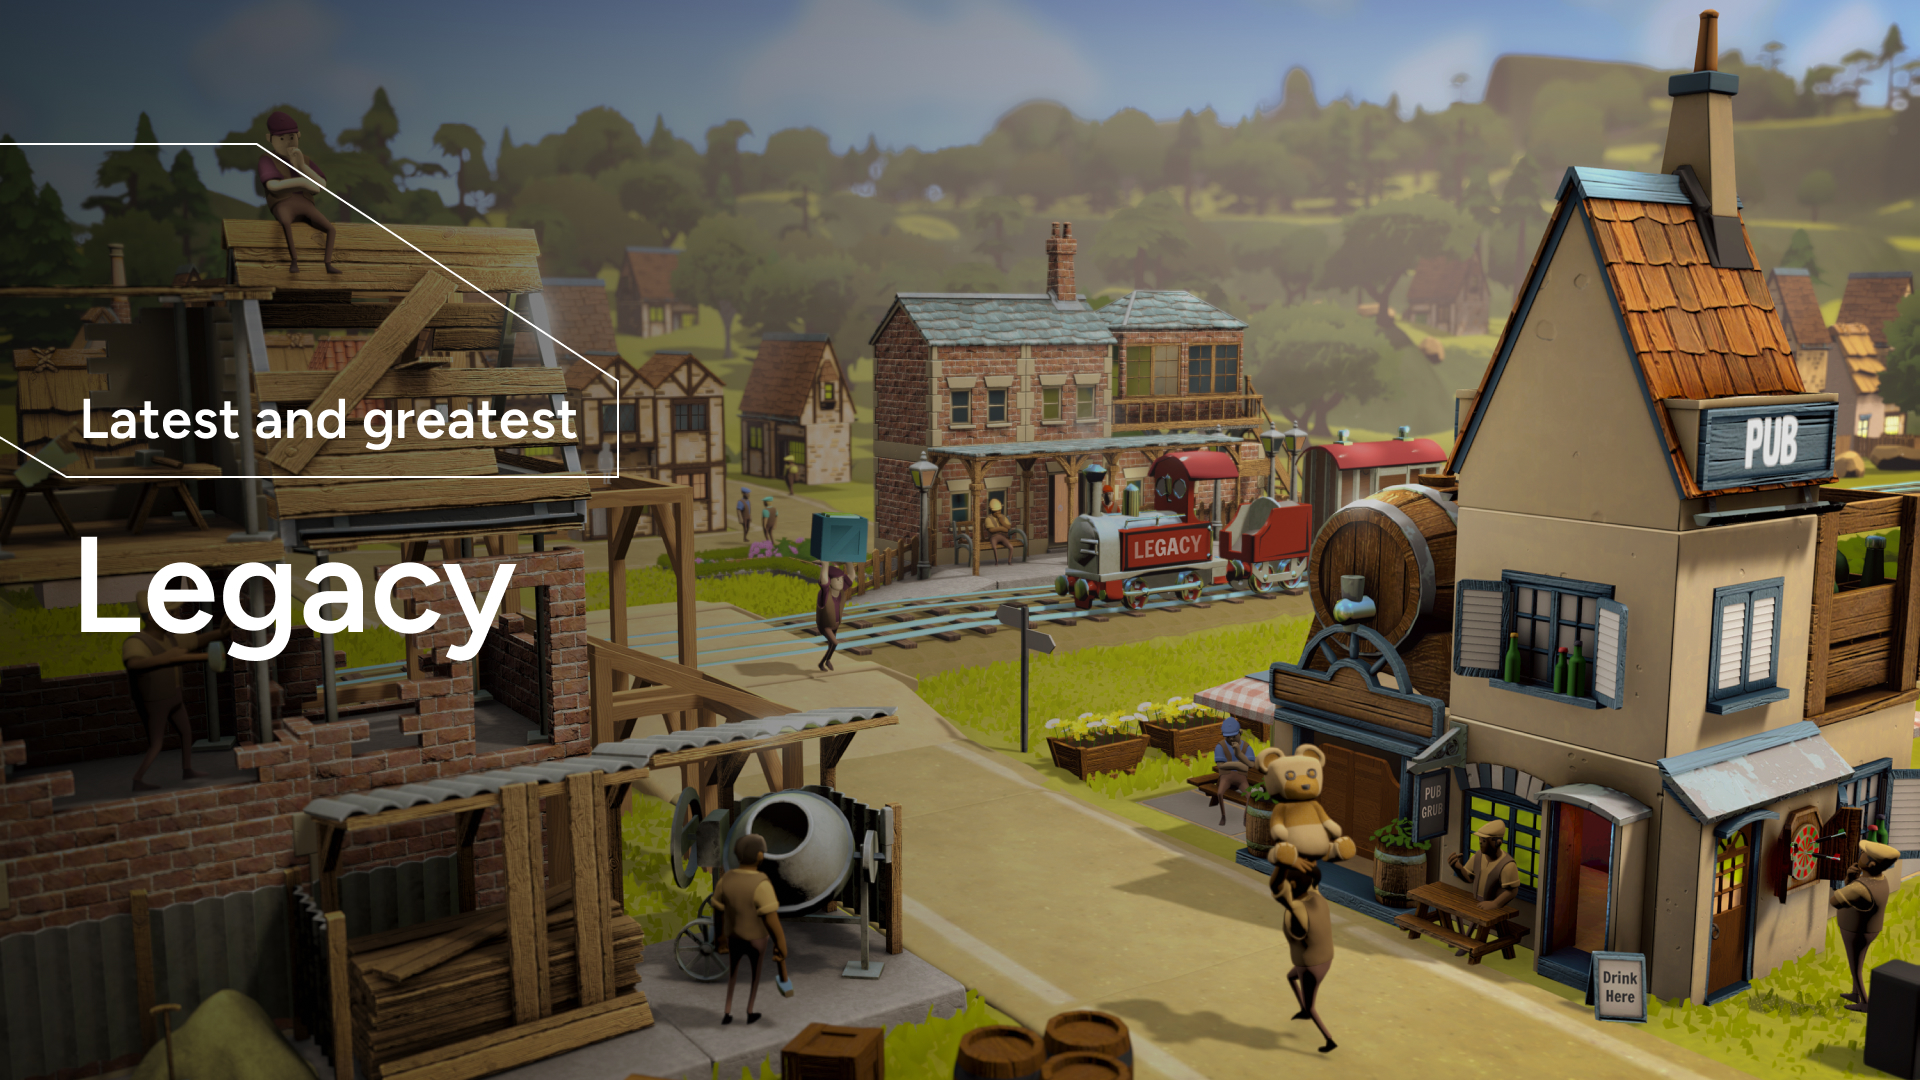 Build a business empire in Legacy, the web3 business sim from Gala Games